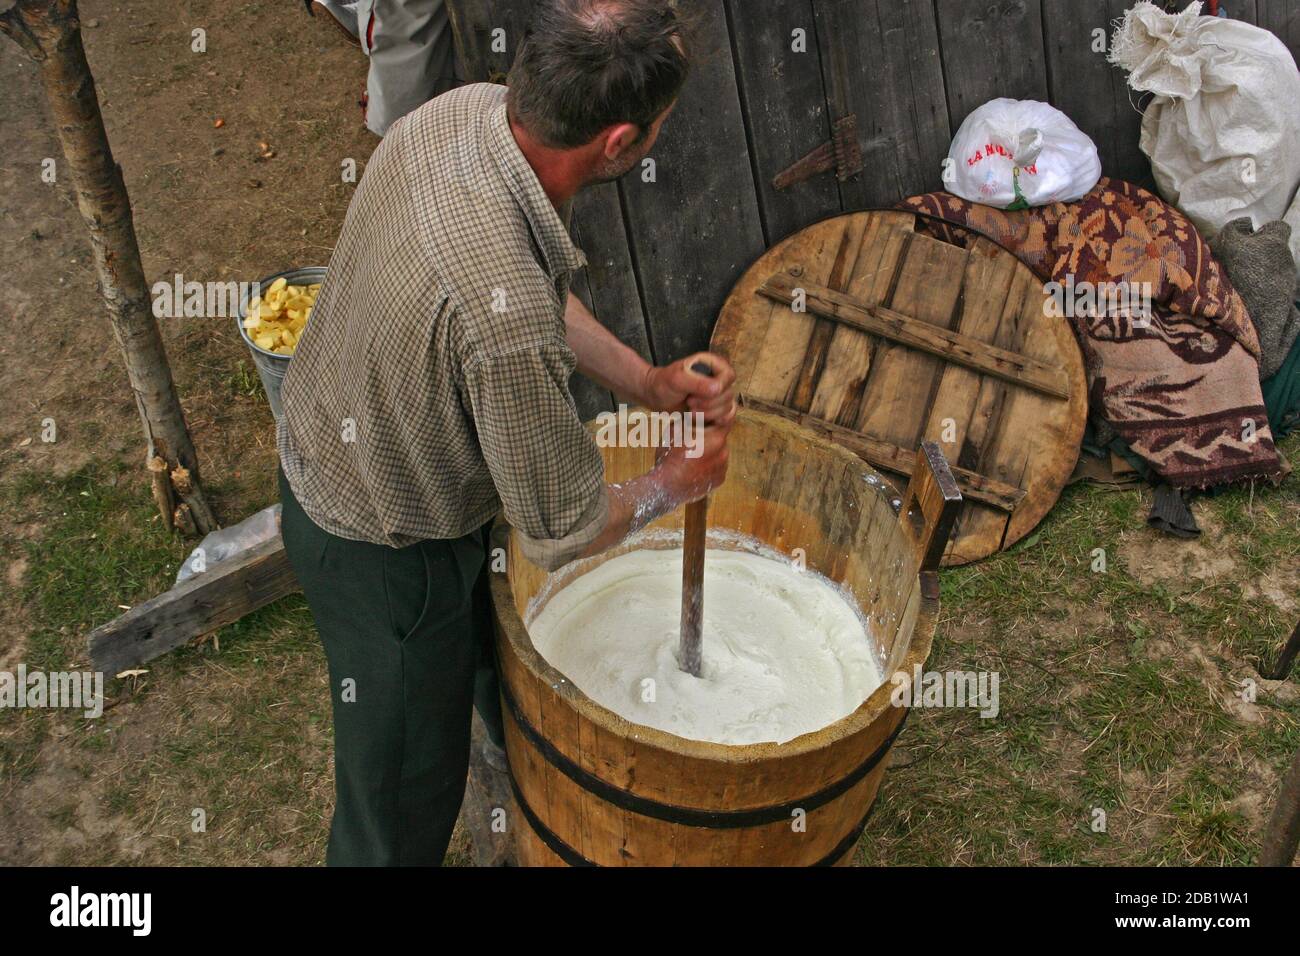 Maramures, Romania. Shepherd making butter the old-fashioned way, manually churning the cream in a wooden barrel. Stock Photo